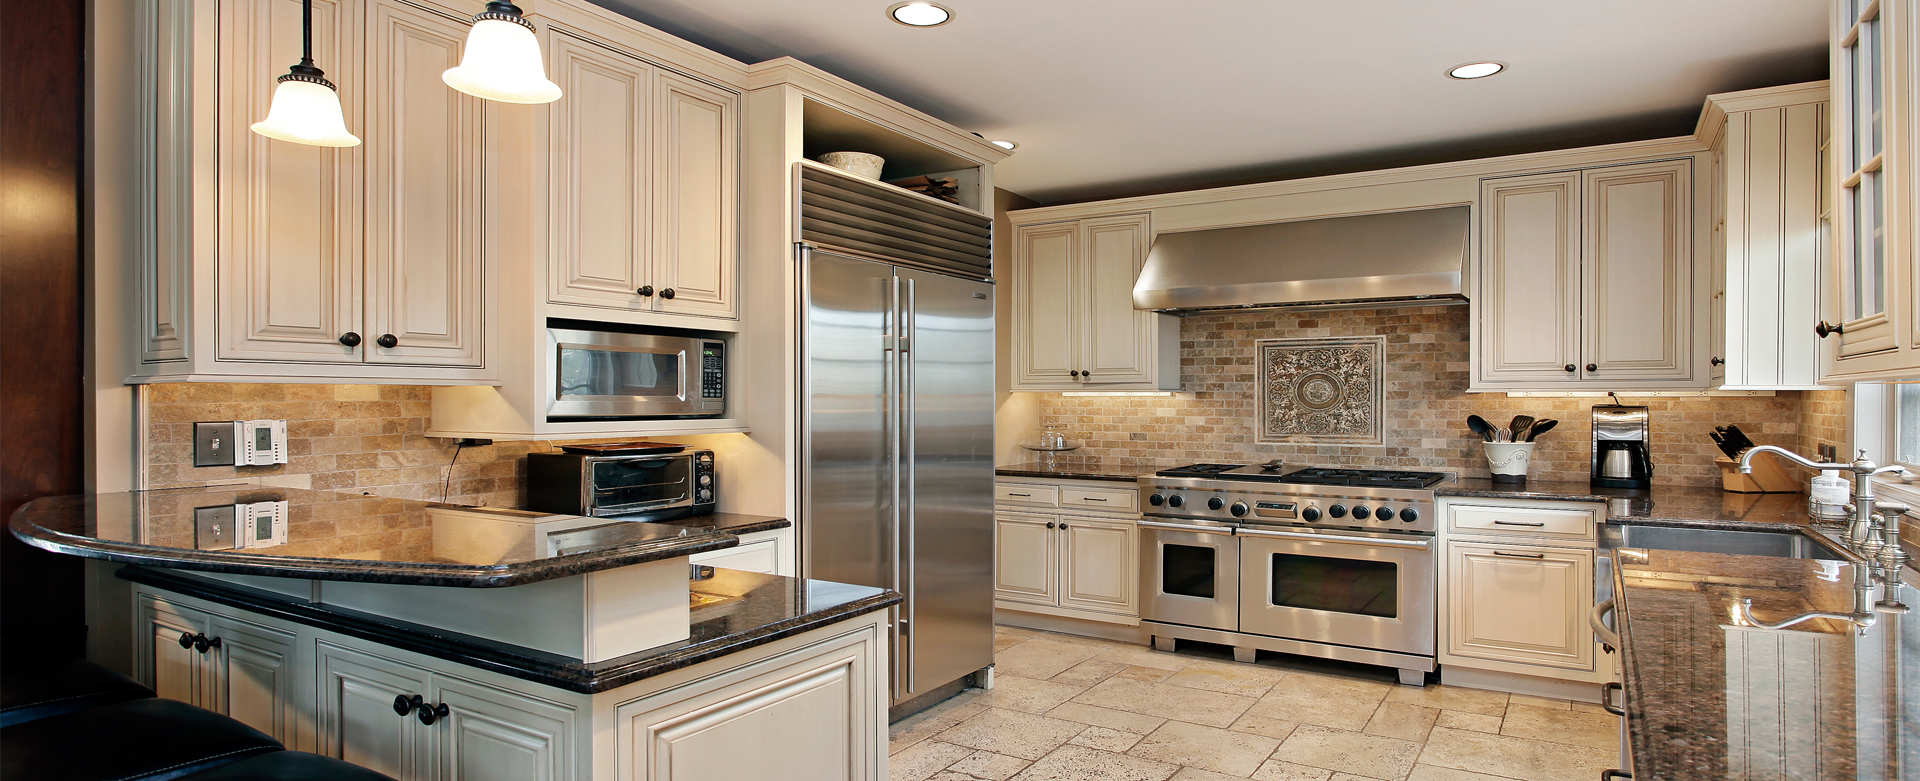  Kitchen Cabinet Doors Near Me for Simple Design